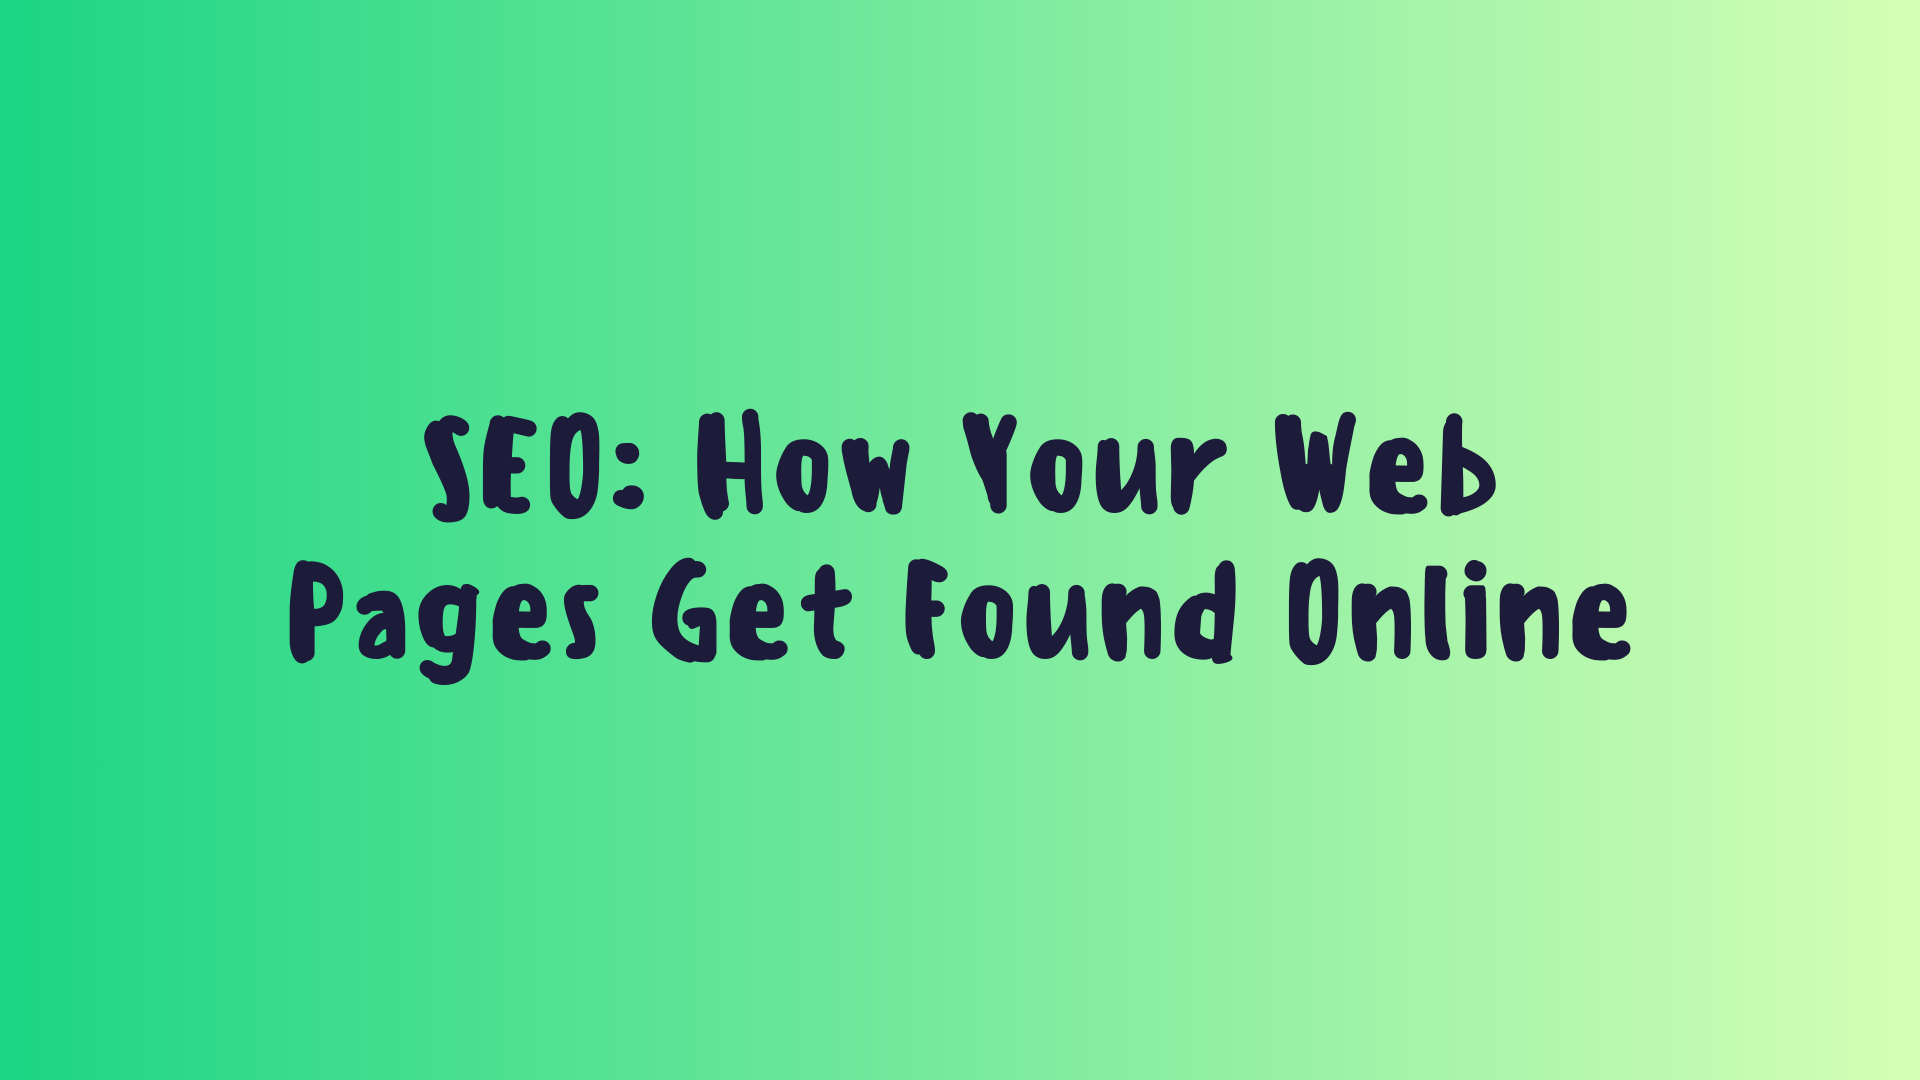 SEO: How Your Web Pages Get Found Online